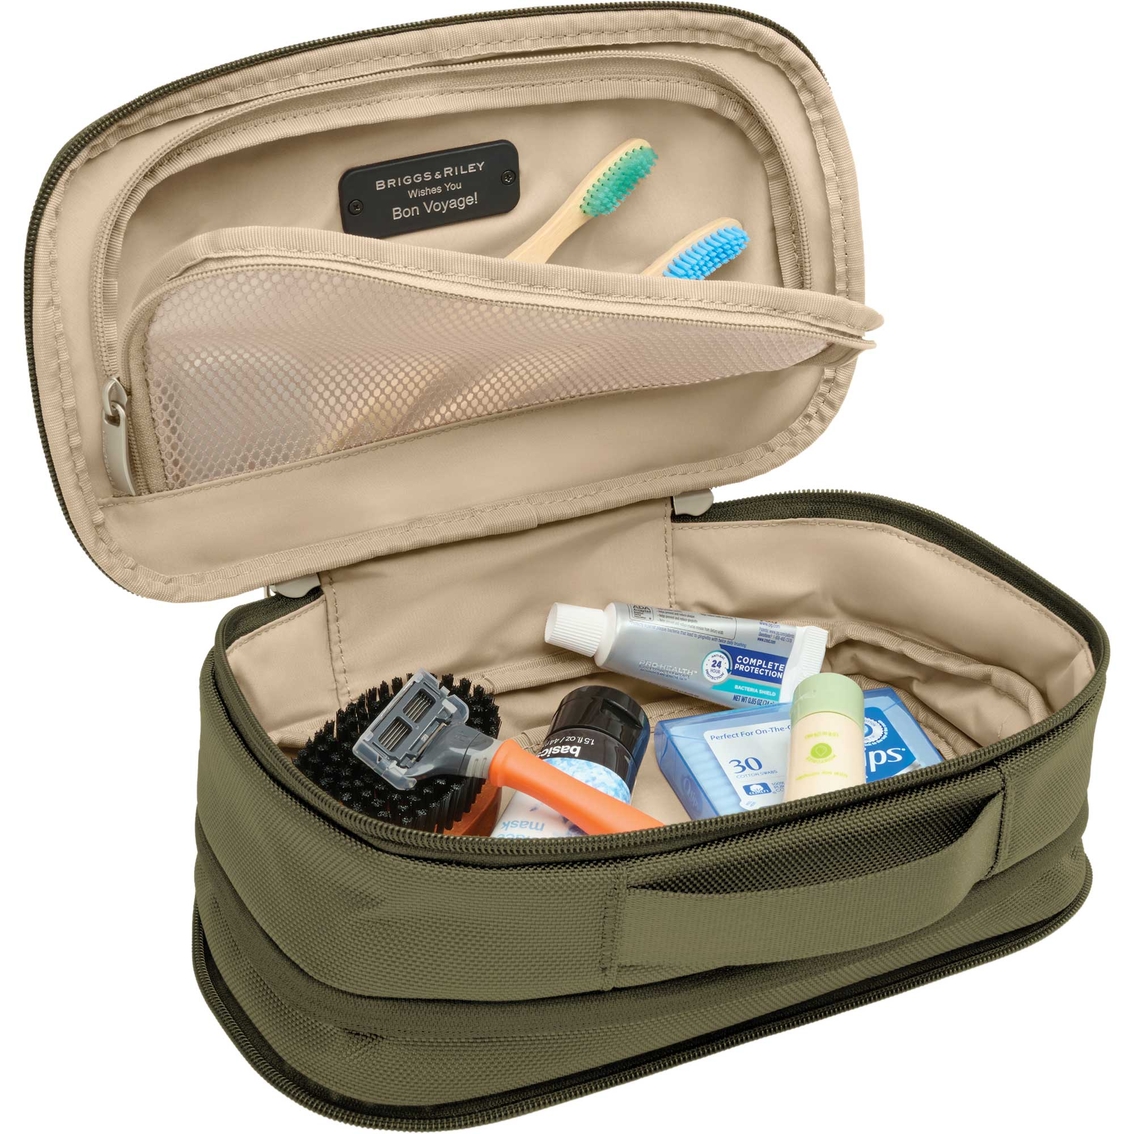 Briggs & Riley Baseline Expandable Essentials Kit - Image 6 of 6